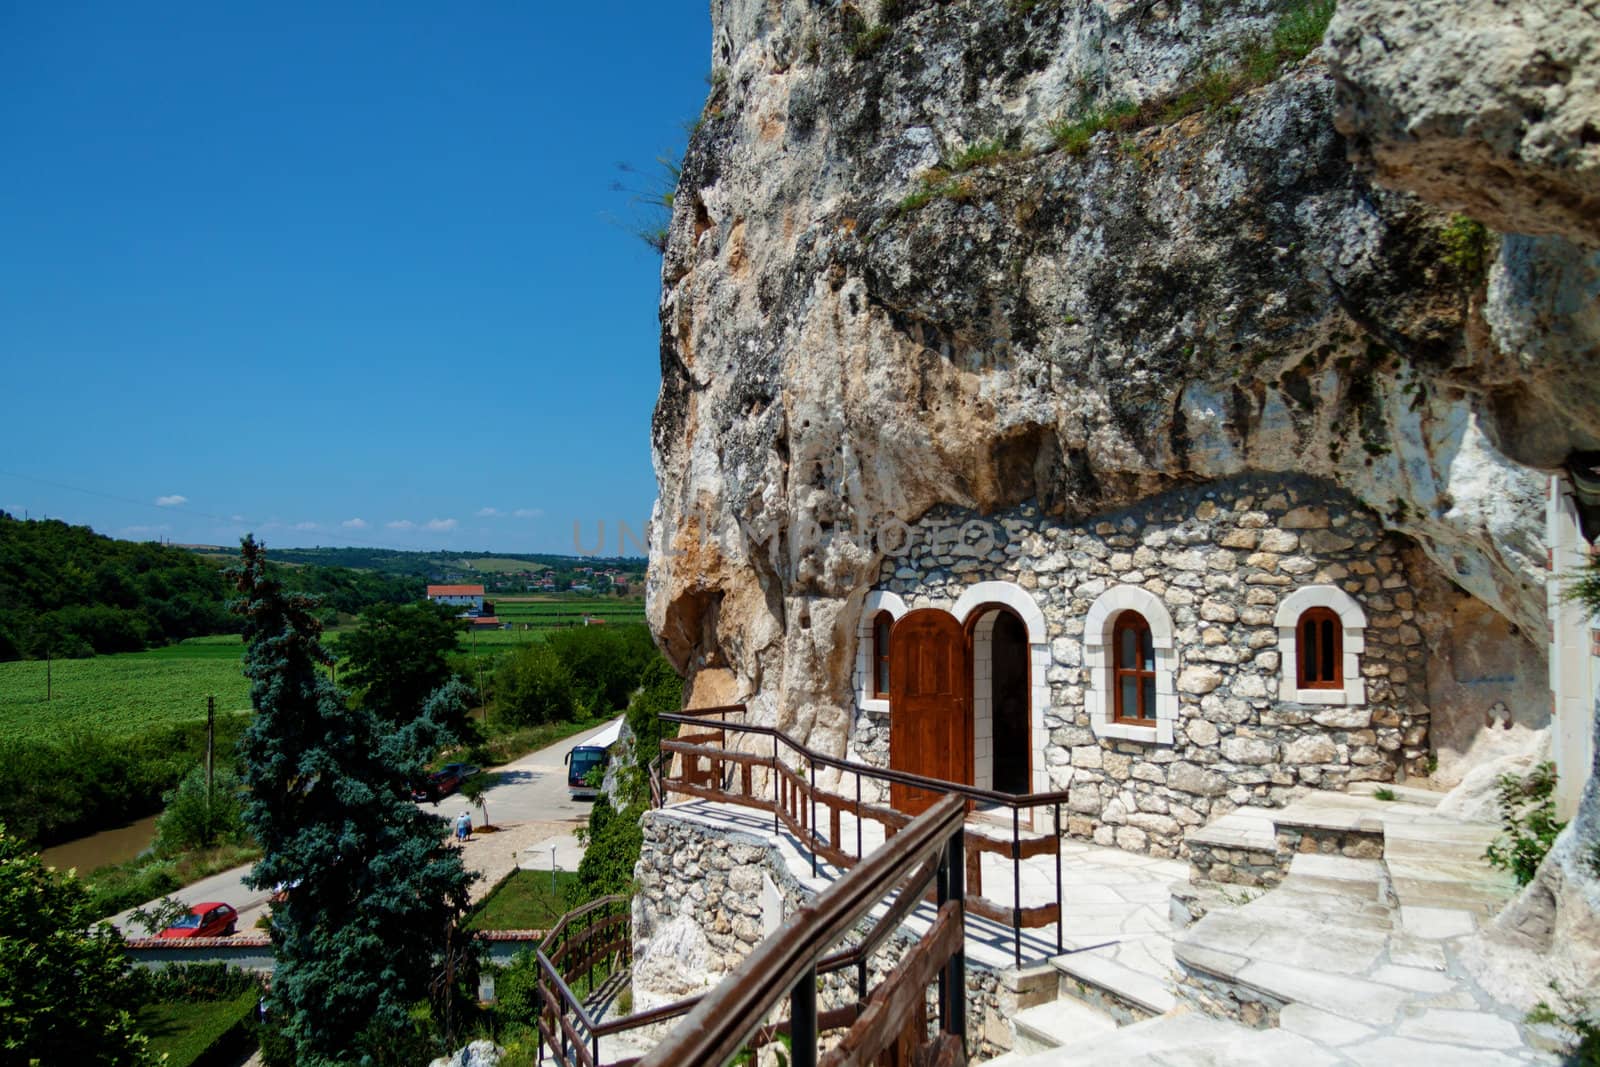 Orthodox monastery excavated in the rocks view from above